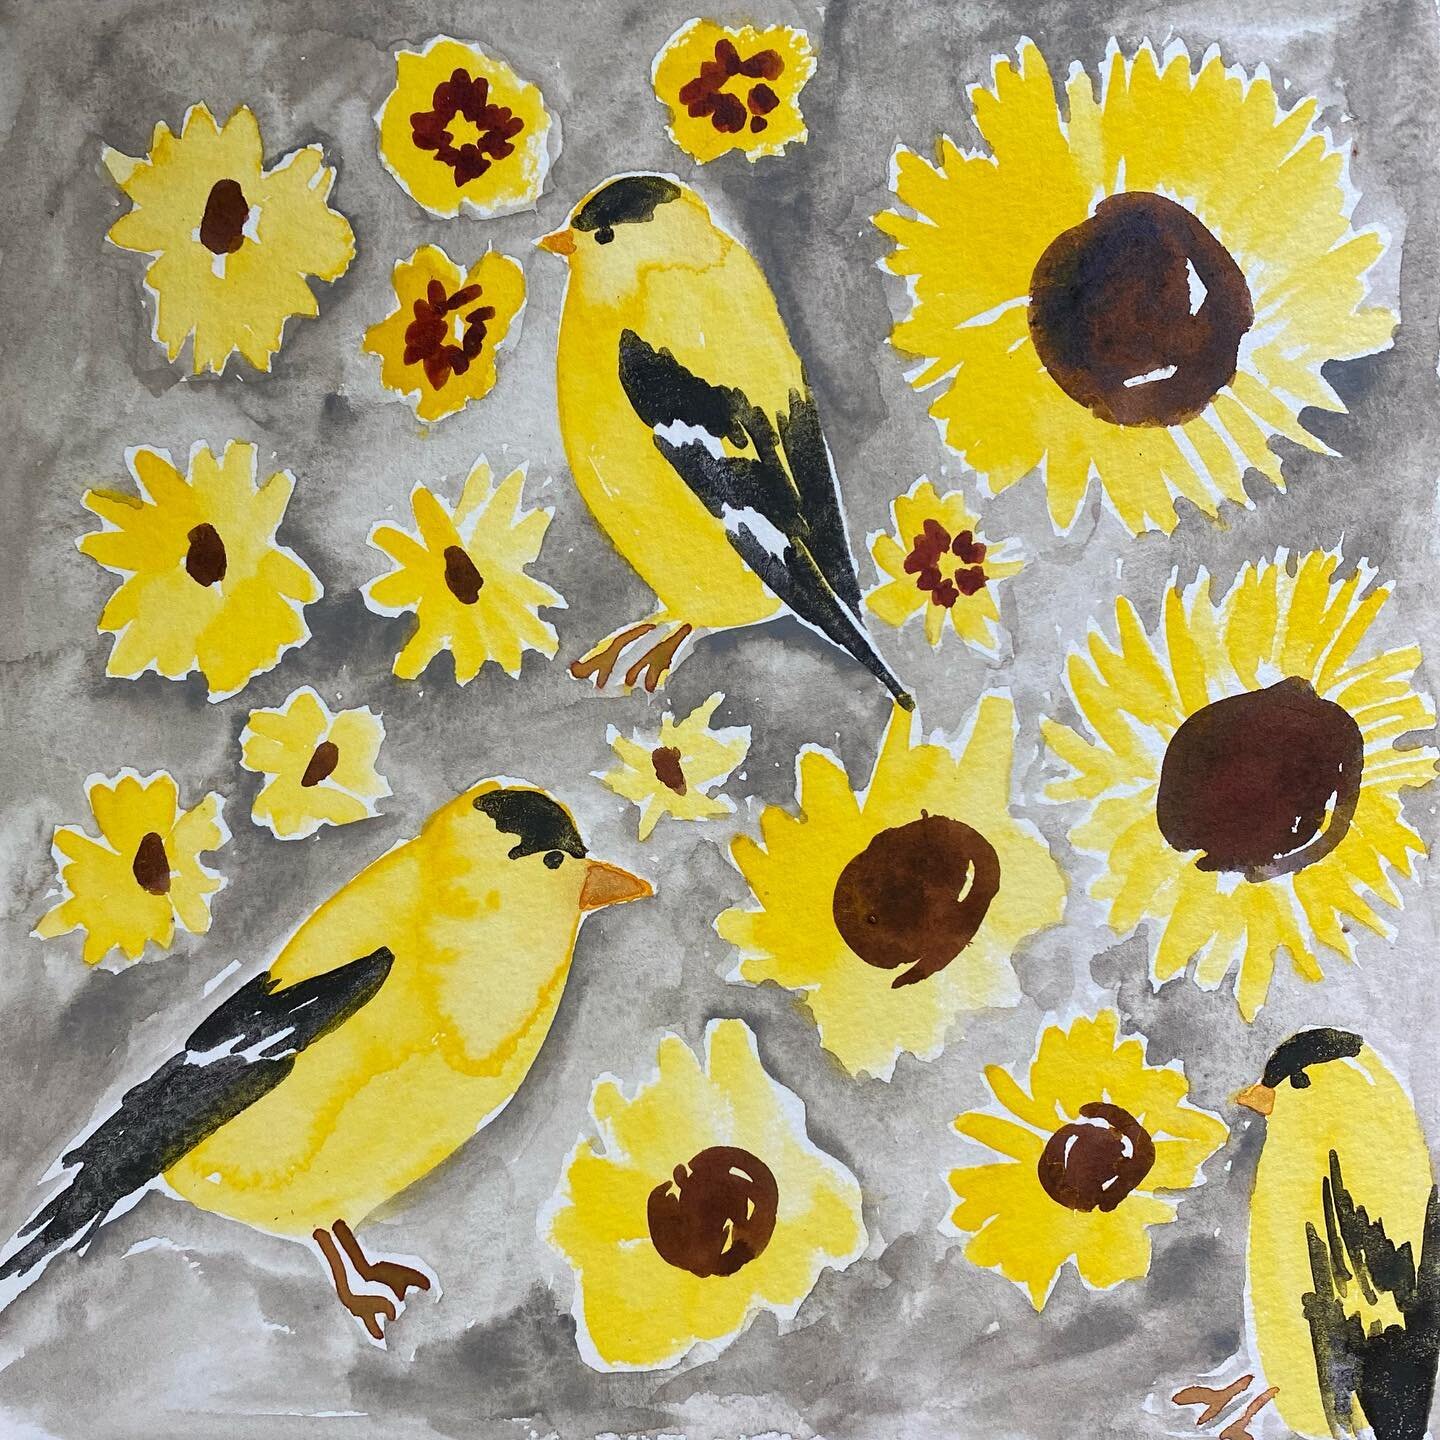 Doodling the yellows of the garden. 💛☀️🌻🌼🐤
Black-eyed Susans, sunflowers, coreopsis, and gold finches! 
#theydrawandgarden